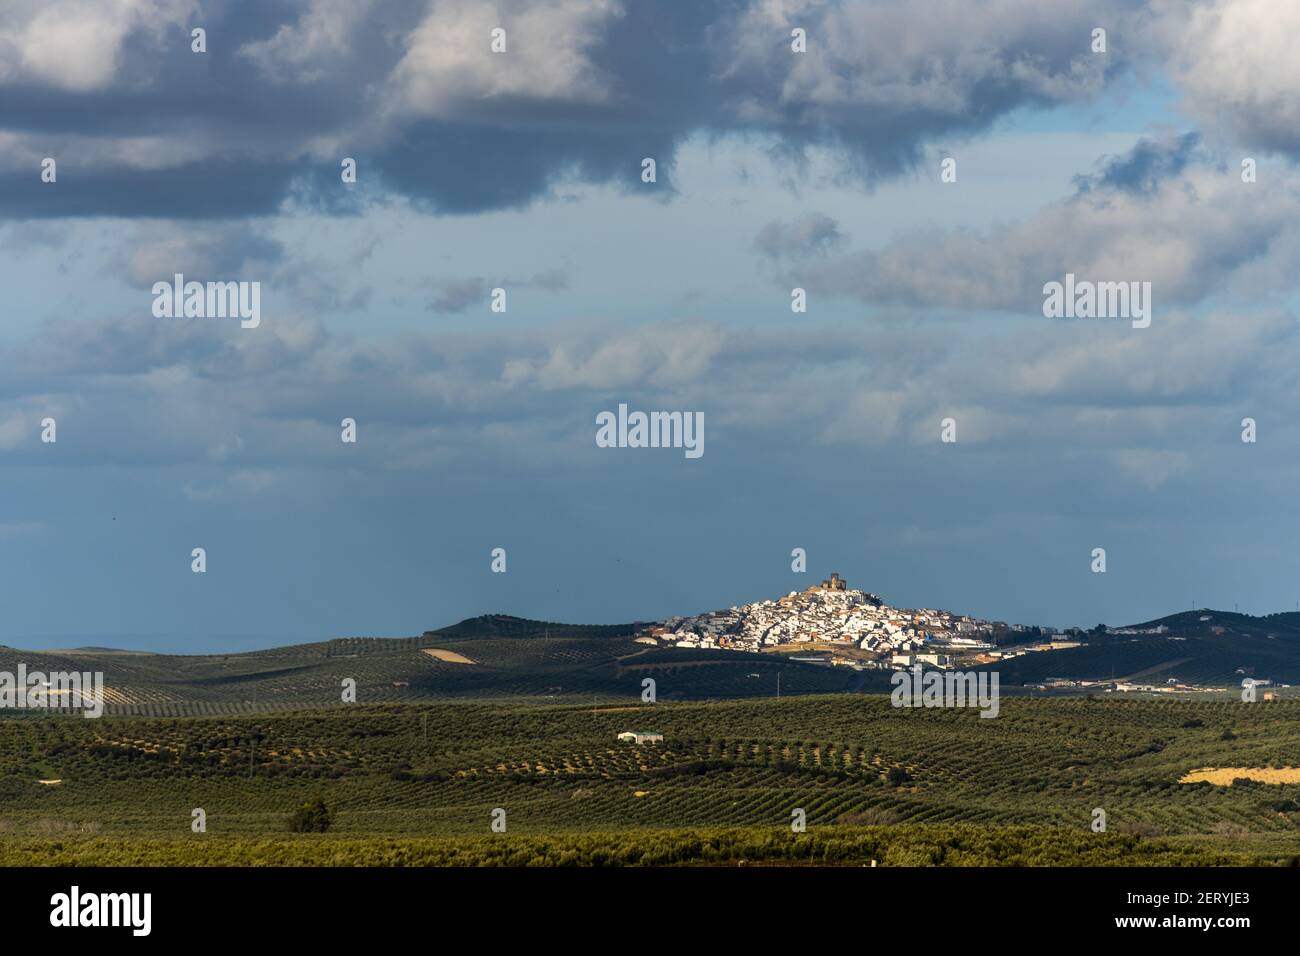 Stock photo of rural village with white houses in the middle of olive trees plantation. Espejo, Cordoba, Spain Stock Photo